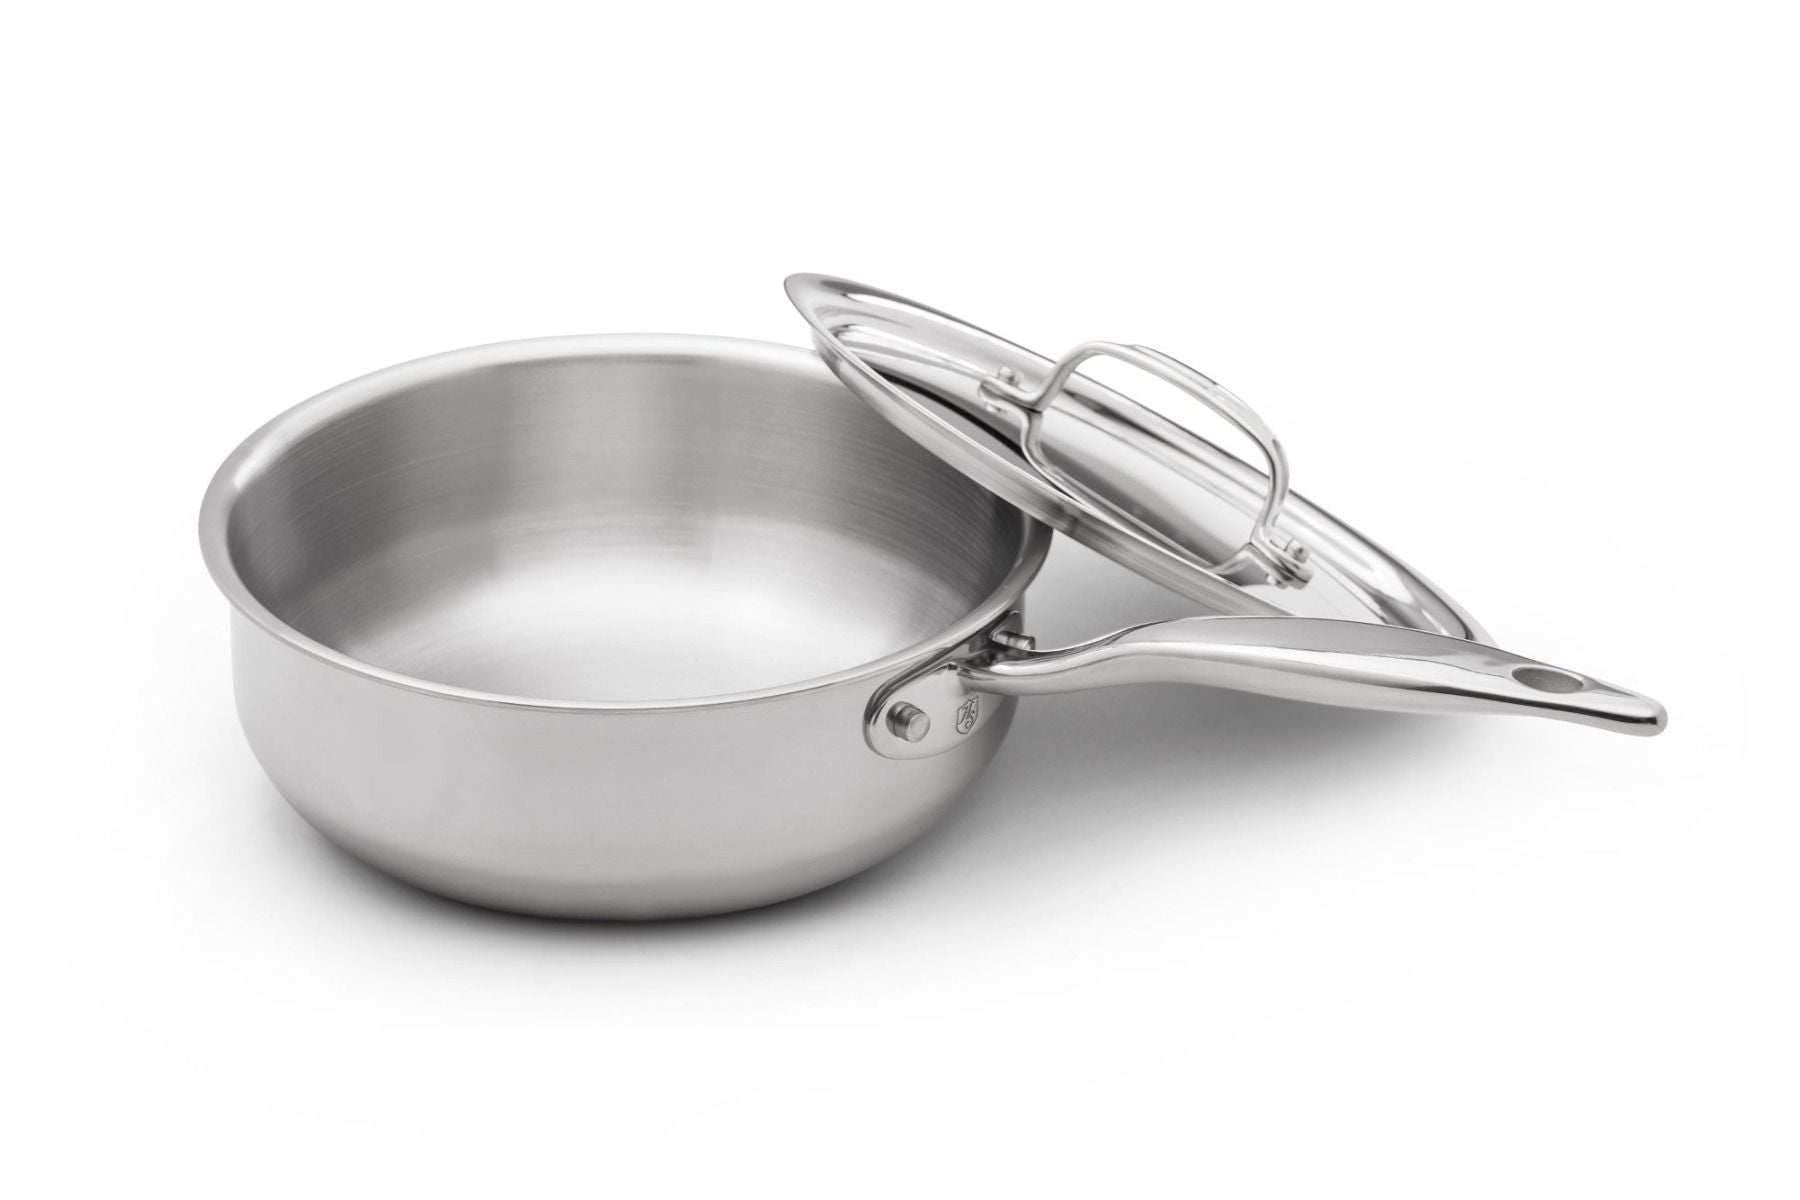 Heritage Steel Cookware Stainless Steel Deep Saute Pan with Cover